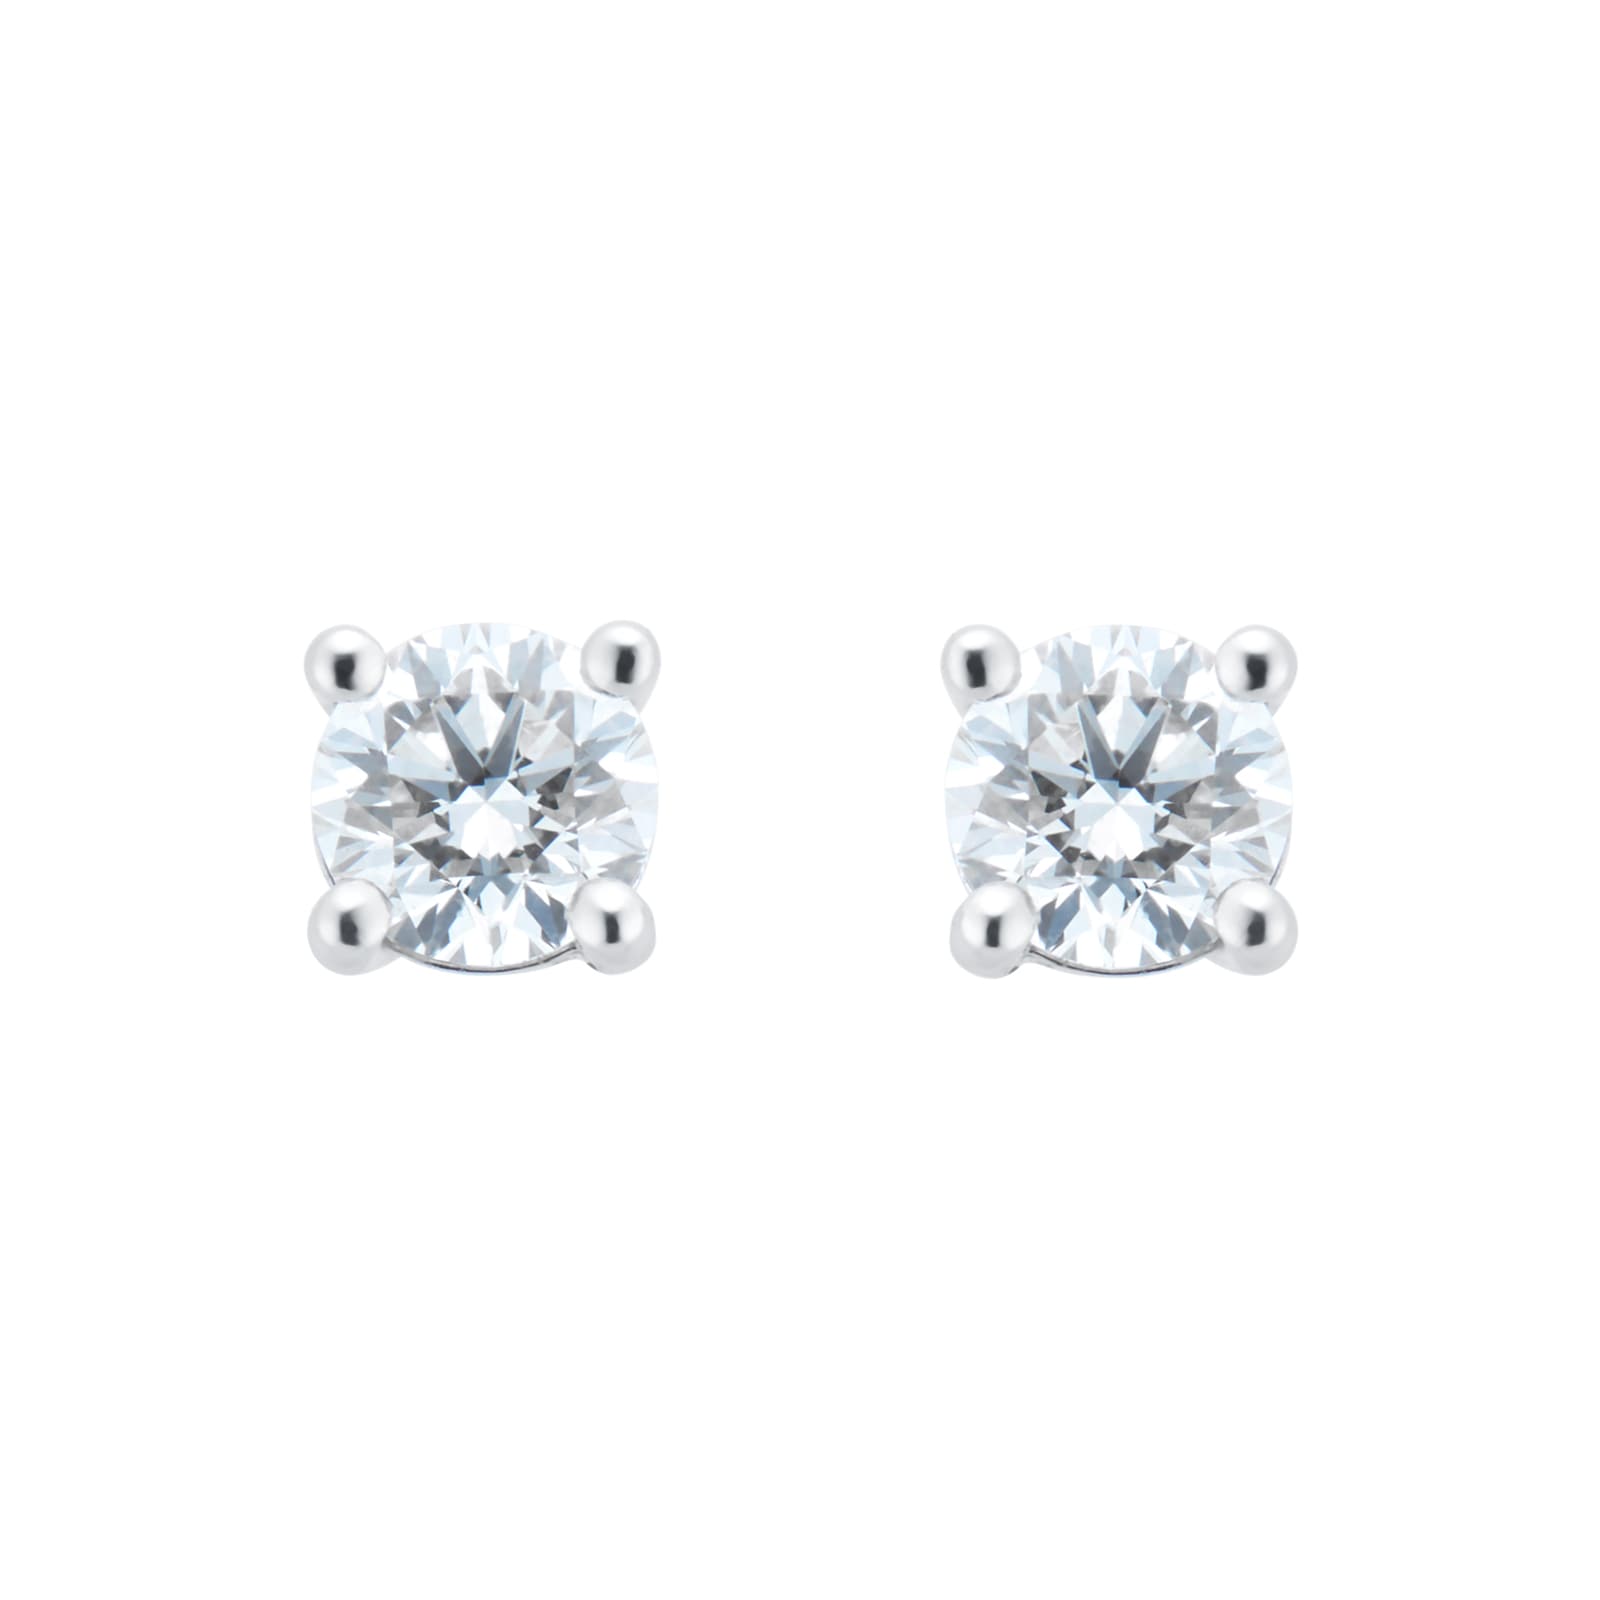 18ct White Gold 0.40cttw Solitaire Diamond Stud Earrings